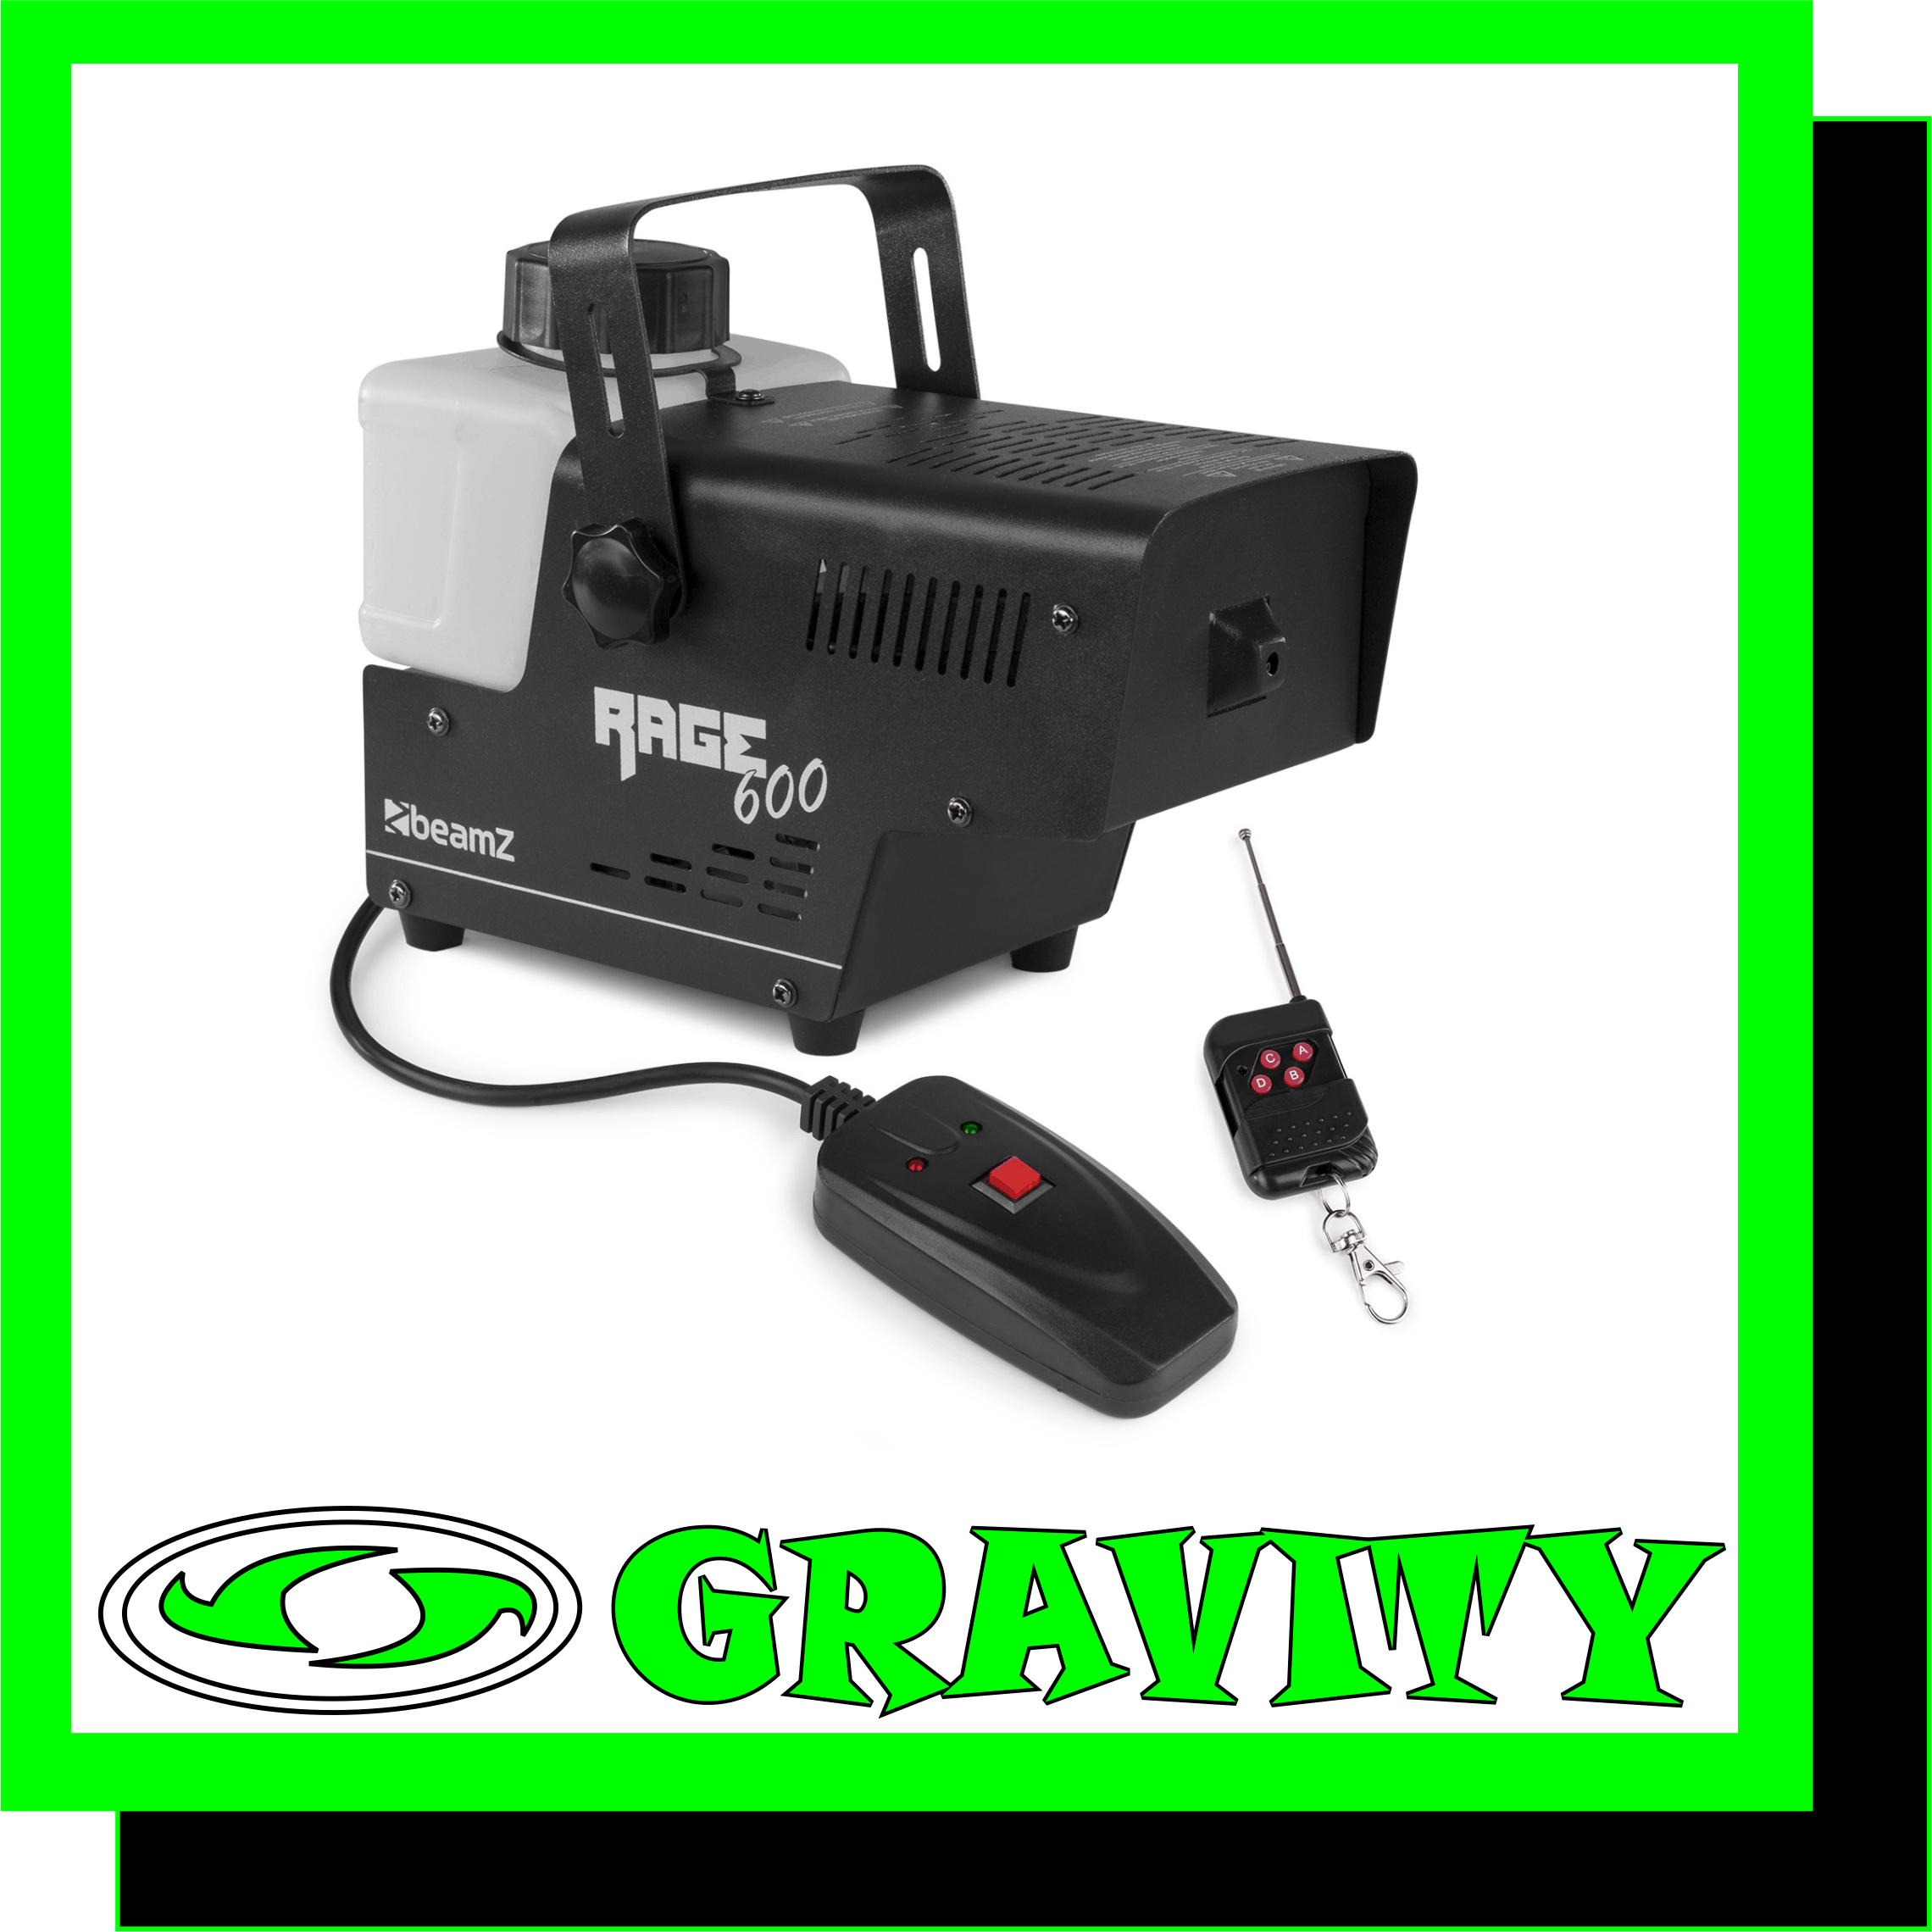 The Rage 600 is a compact 600W smoke machine in a strong metal housing. Powered by a 600W heating element that delivers up to 65m³ per minute output and heats up in just 3 minutes. The ideal choice for mobile working DJ's and very suitable for smaller venues. Operation with a wired (3m cable) and a wireless remote control. 600W Smoke machine Thermostatically controlled heater 500ml Smoke fluid tank Short heat-up time Wireless controllable Remote control with 3m cable..